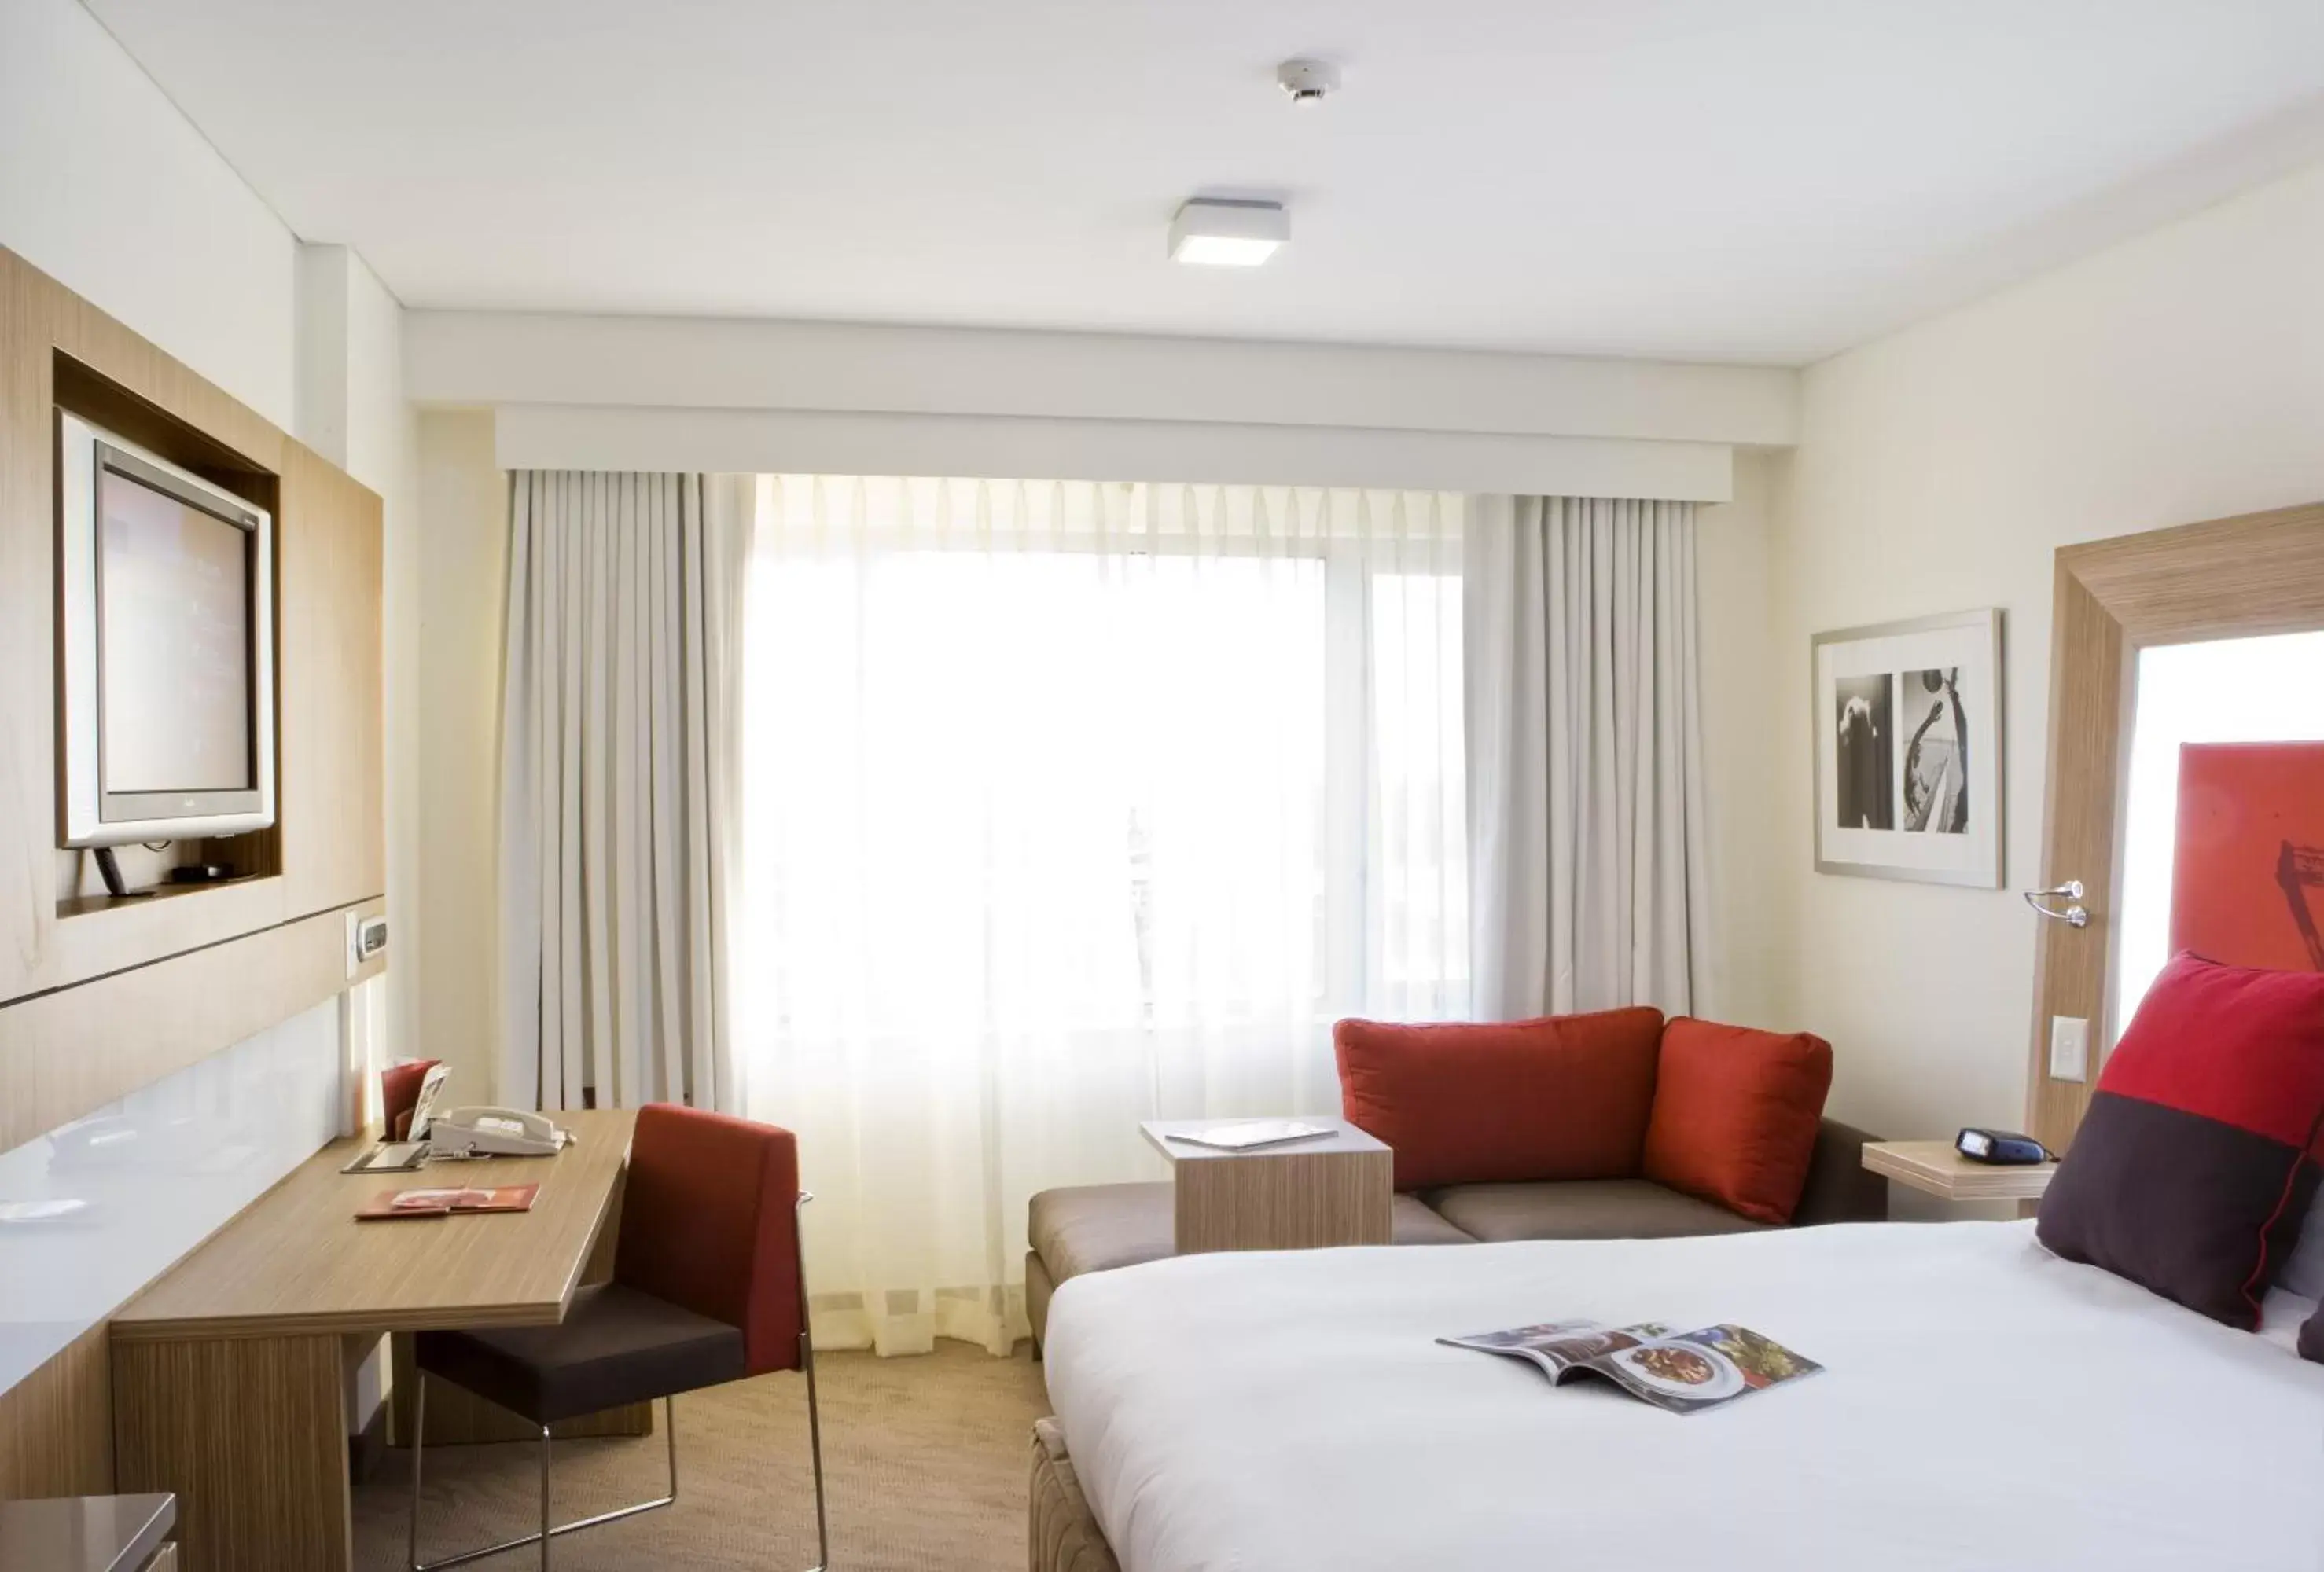 Superior King Room with Balcony in Novotel Sydney Olympic Park